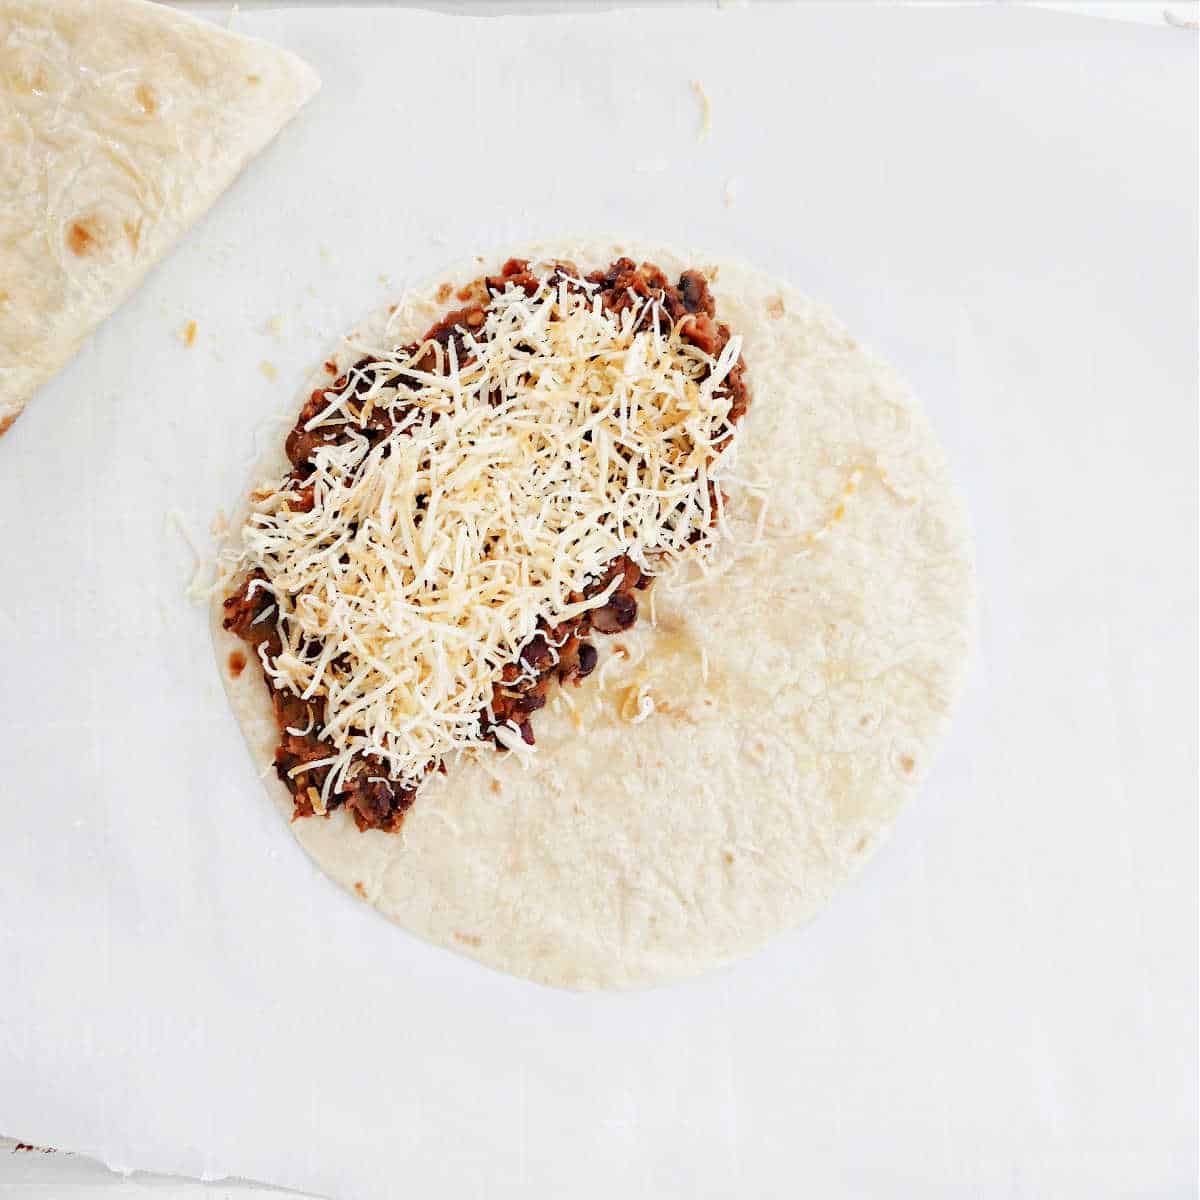 tortilla with black bean filling and shredded cheese on a baking sheet